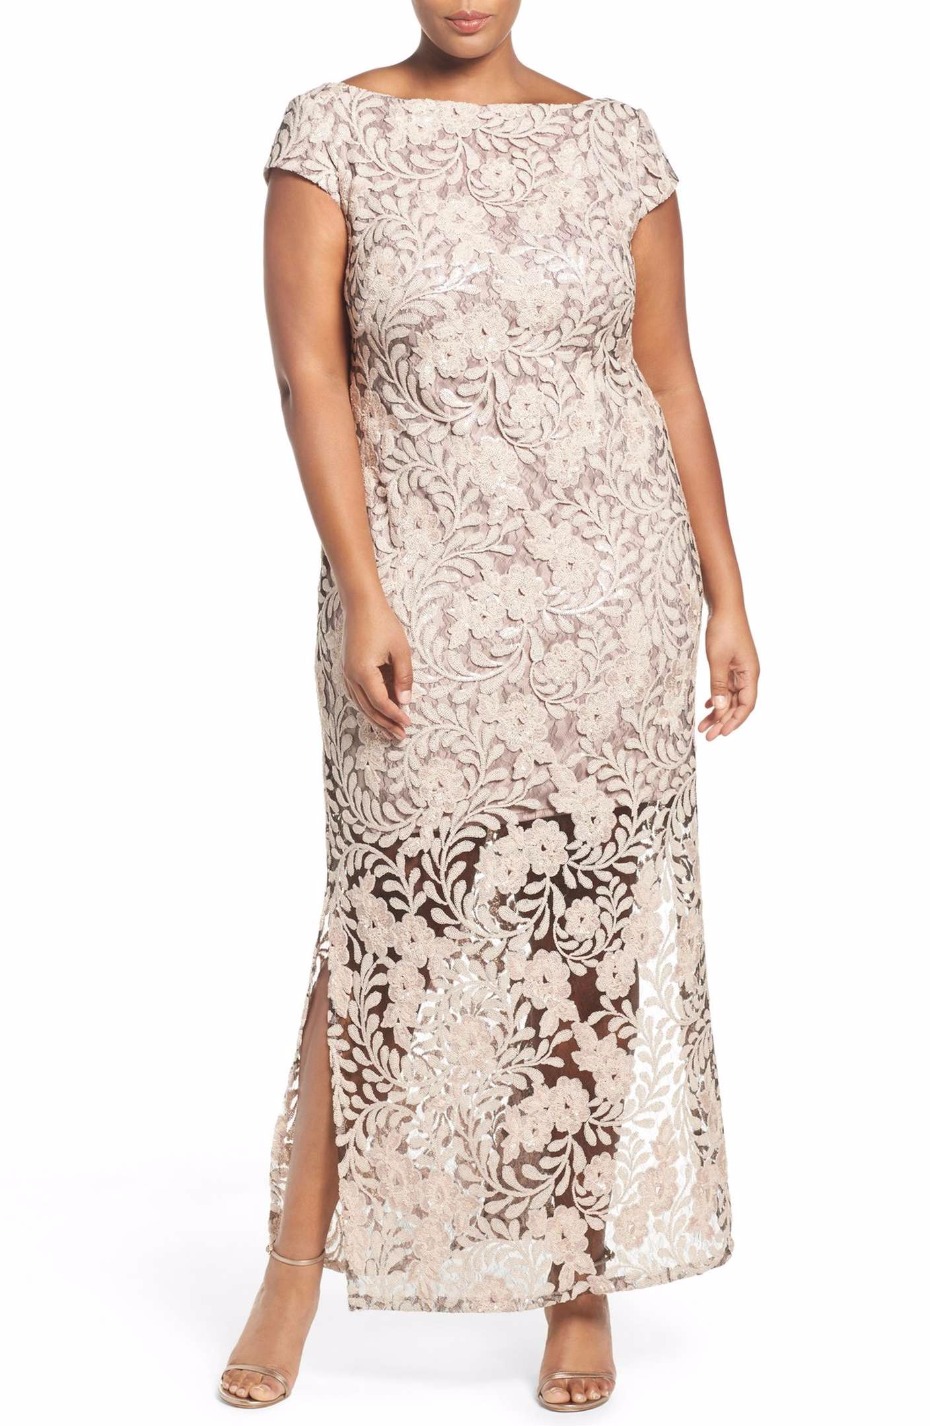 10 Plus Sized Mother of the Bride Dresses You'll Love